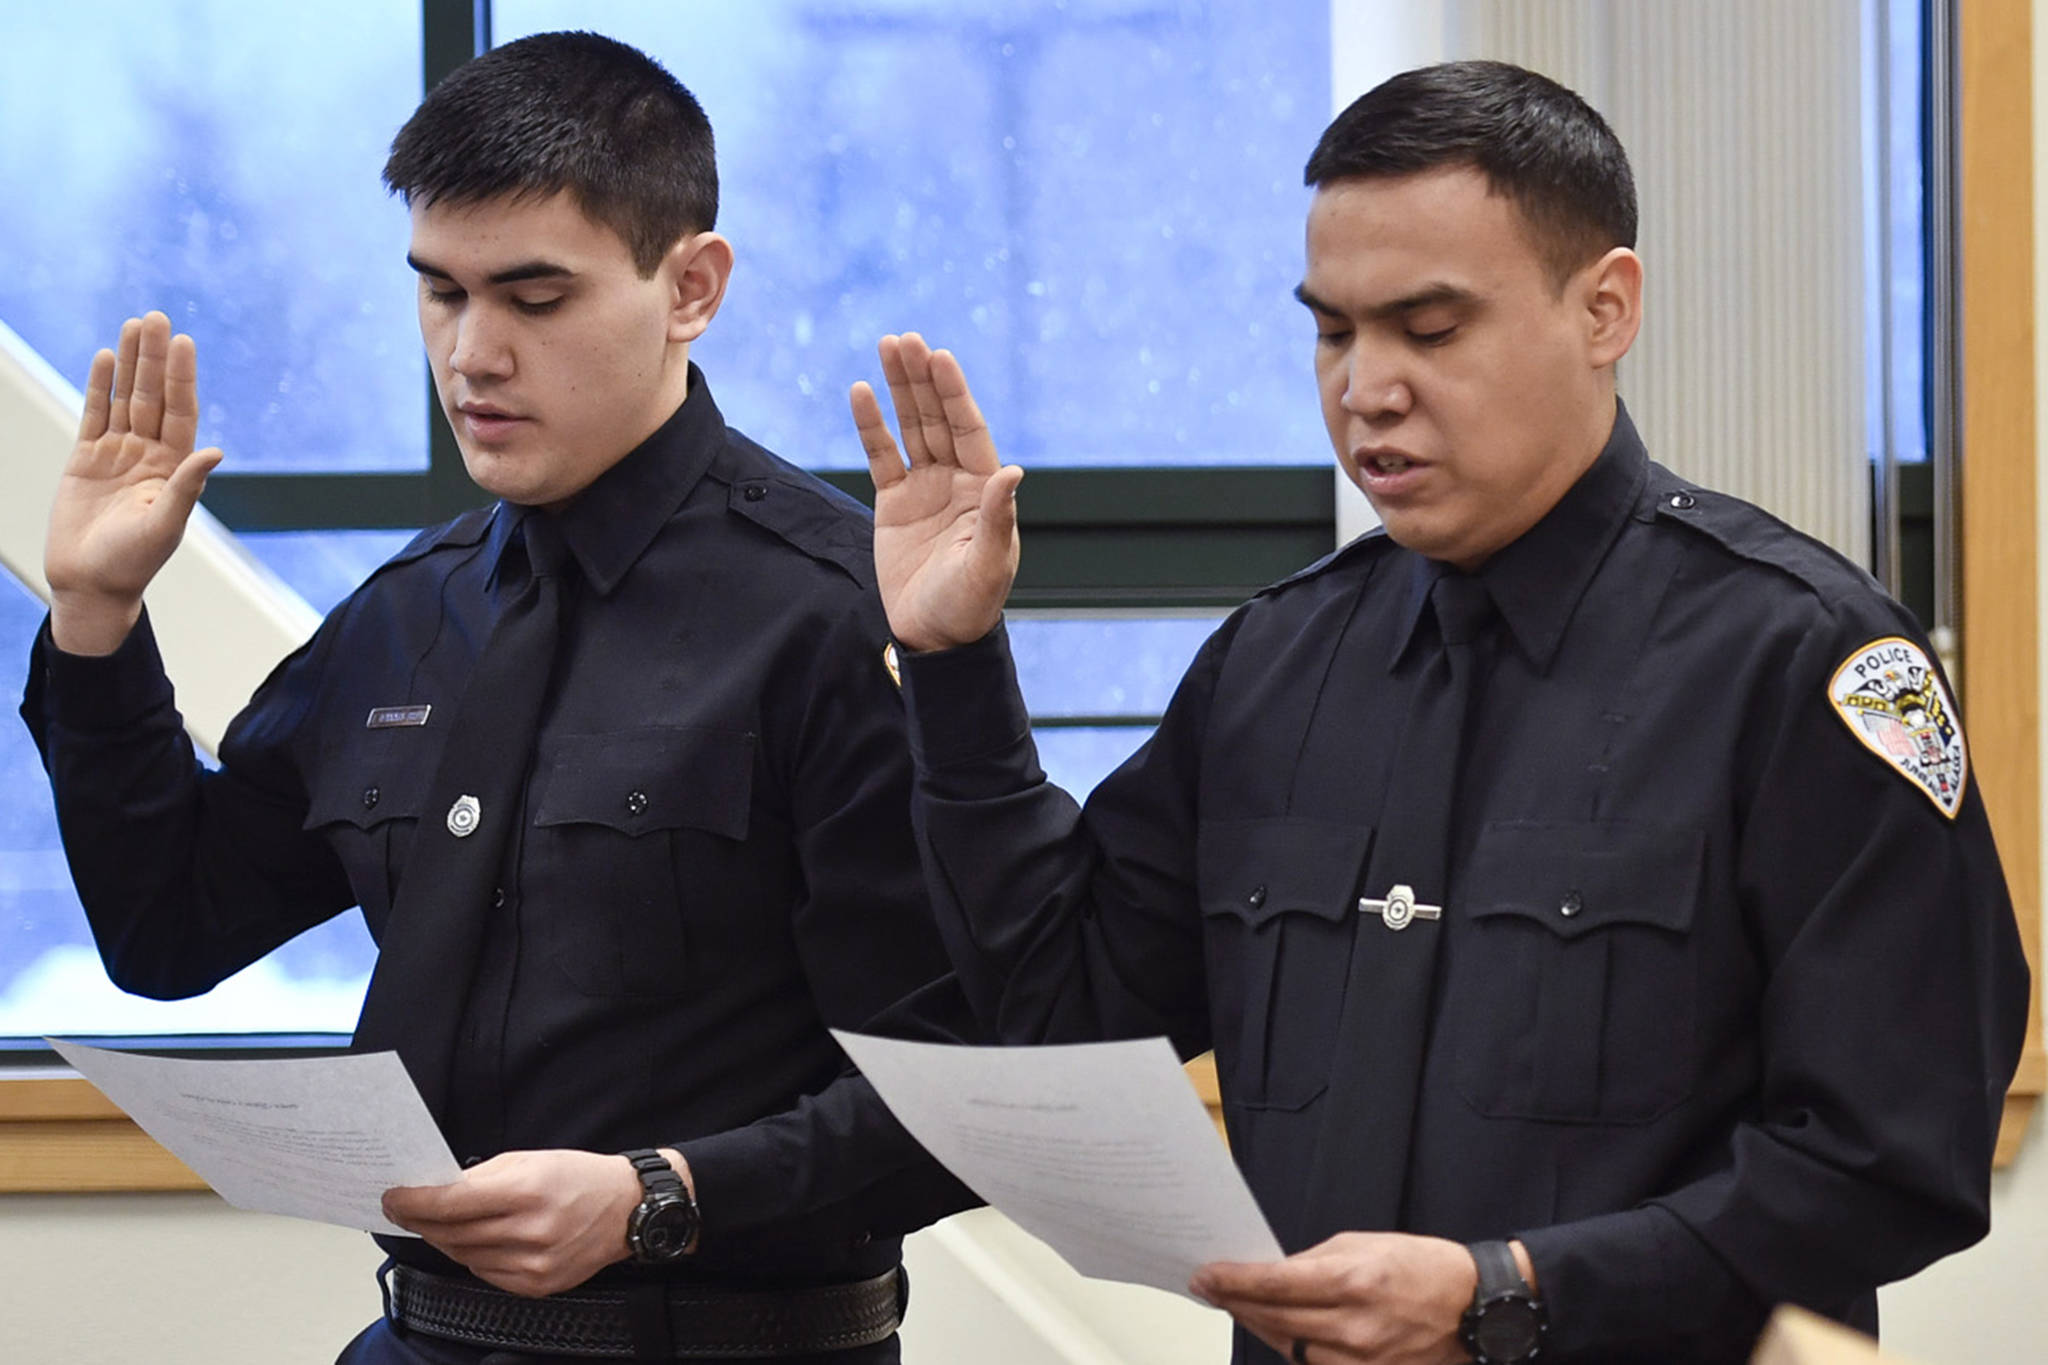 Jonah Hennings-Booth, of Eagle River, left, and Duain White, of Juneau, are sworn in during a ceremony at the Juneau Police Department station on Thursday, Feb. 21, 2019. (Michael Penn | Juneau Empire File)